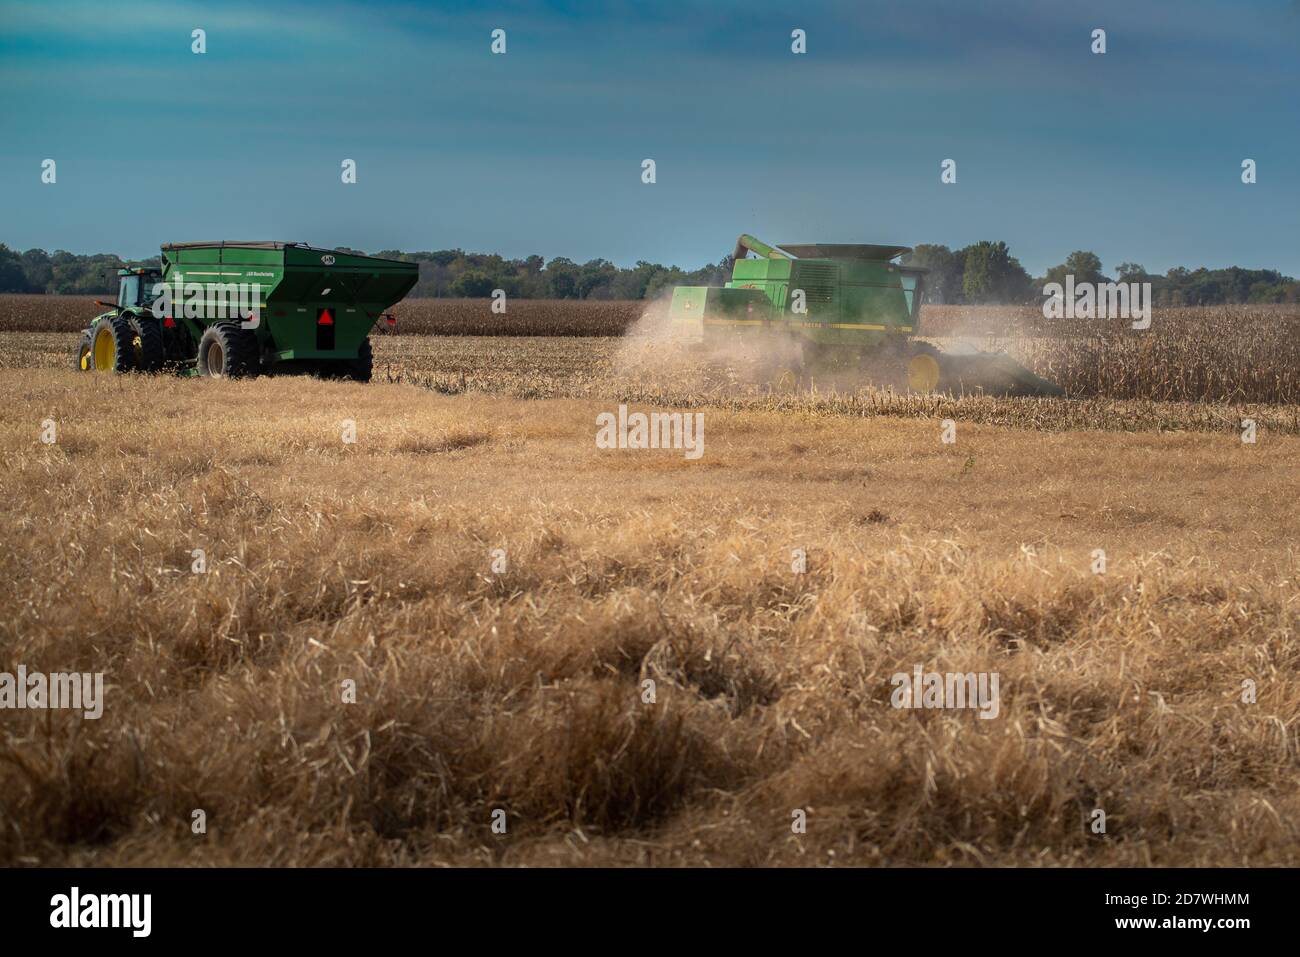 Lebanon, IL--Oct 17, 2020; dust and particles shoot out the back of a harvester collecting dry golden corn stalks during autumn harvest time in a midw Stock Photo